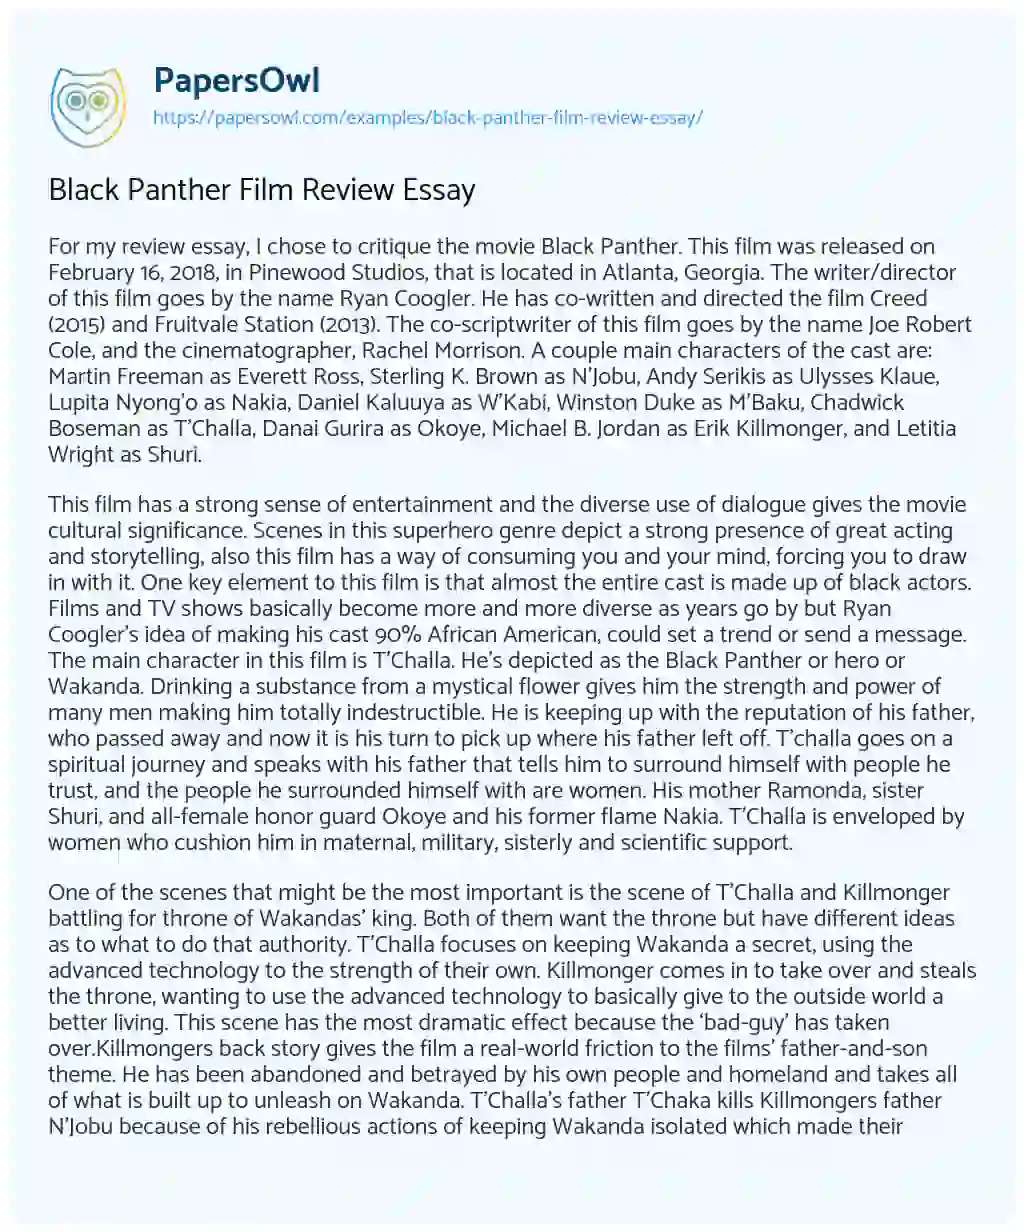 Essay on Black Panther Film Review Essay